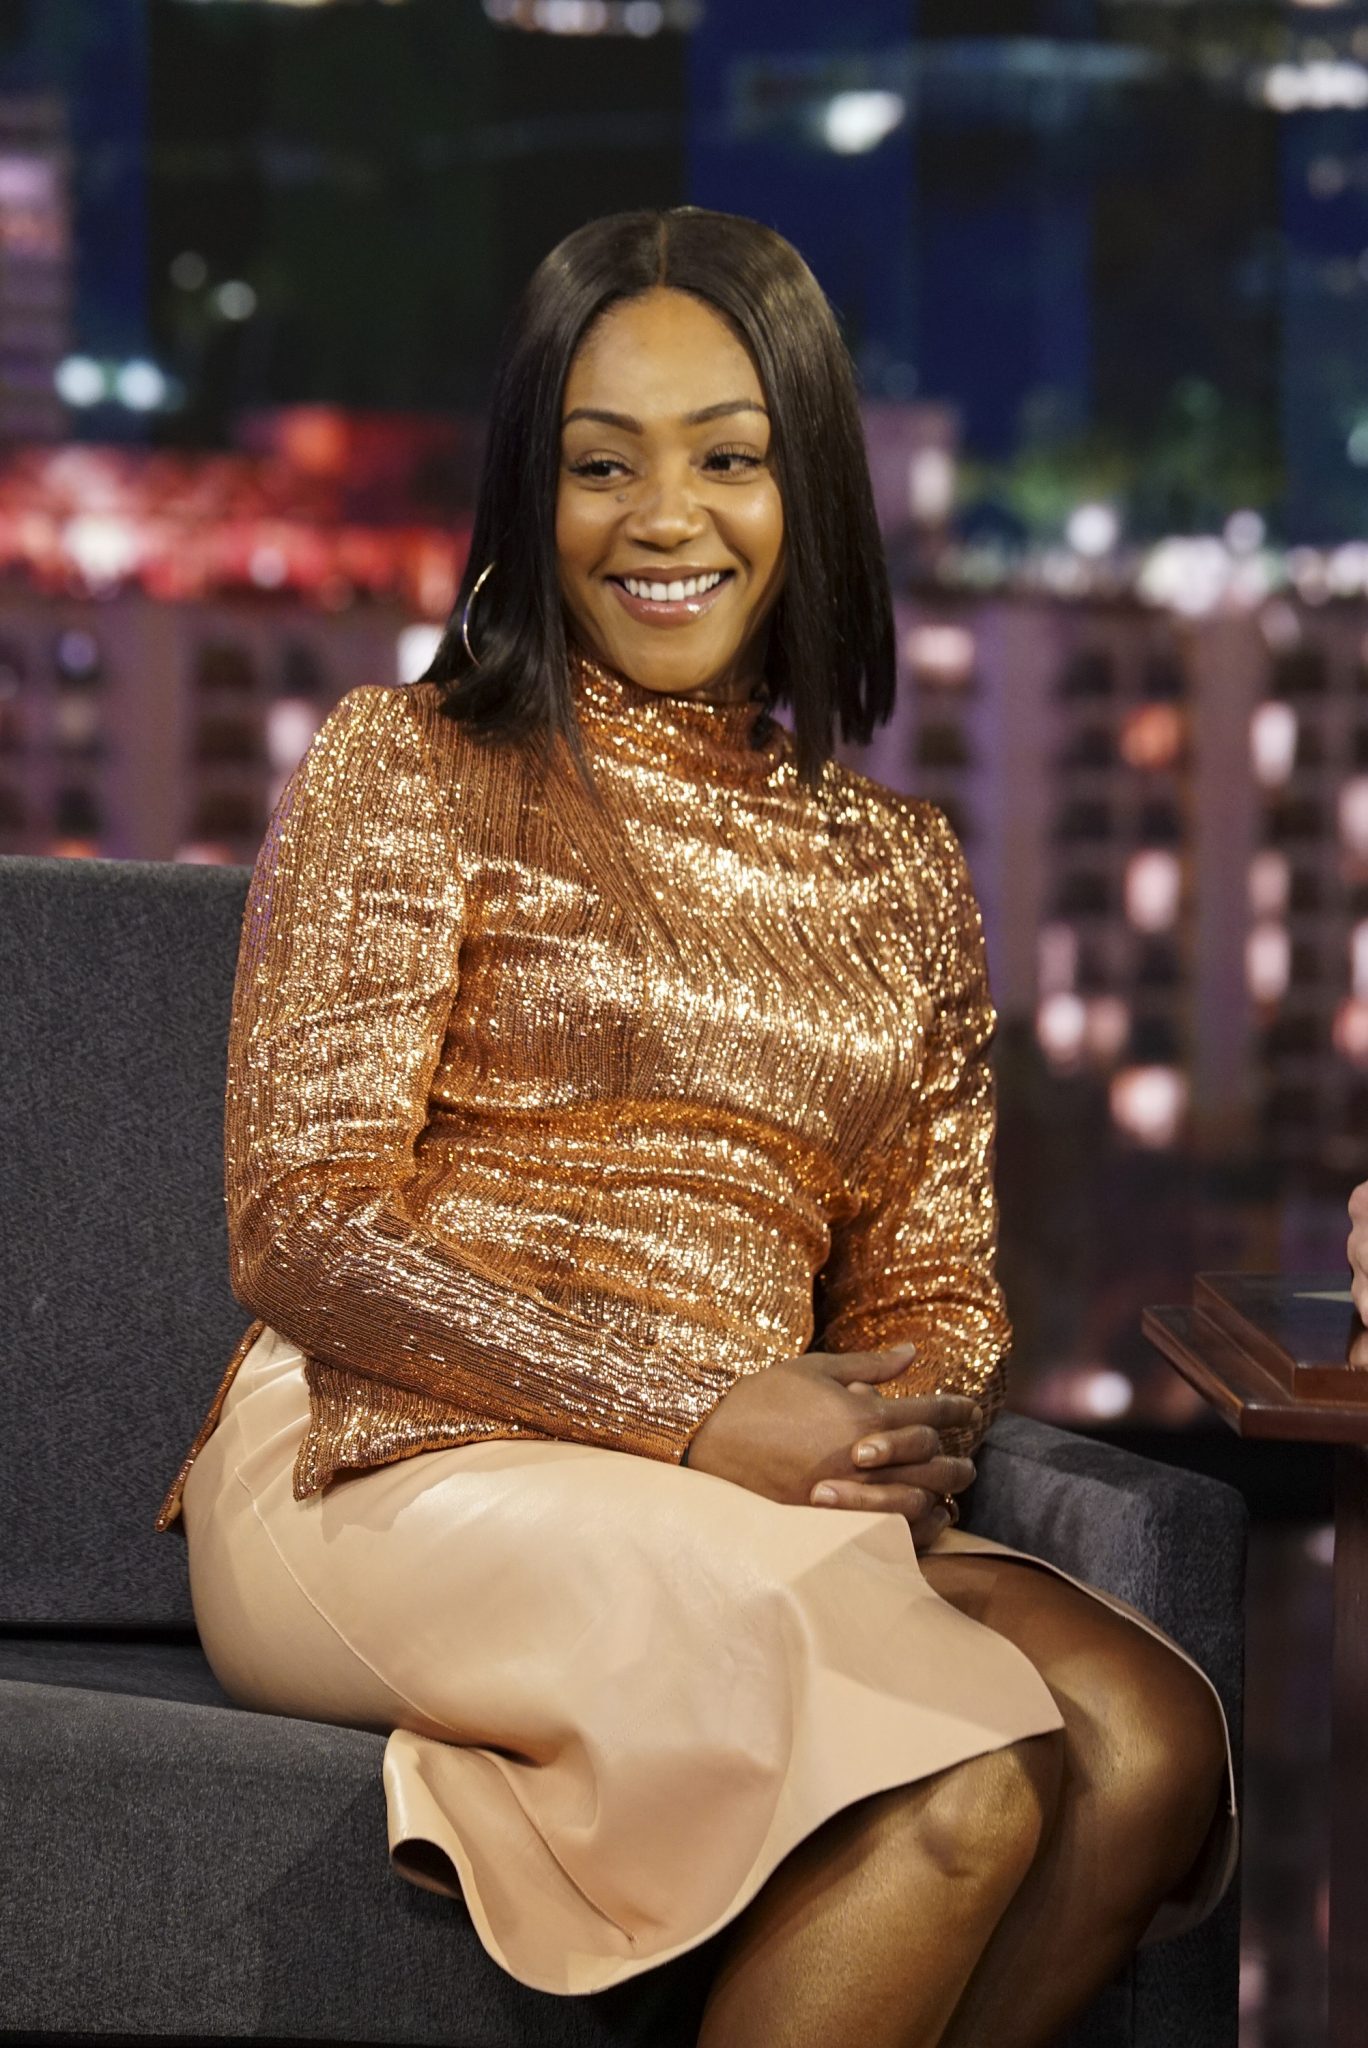 In Case You Missed It: Tiffany Haddish On Jimmy Kimmel Live